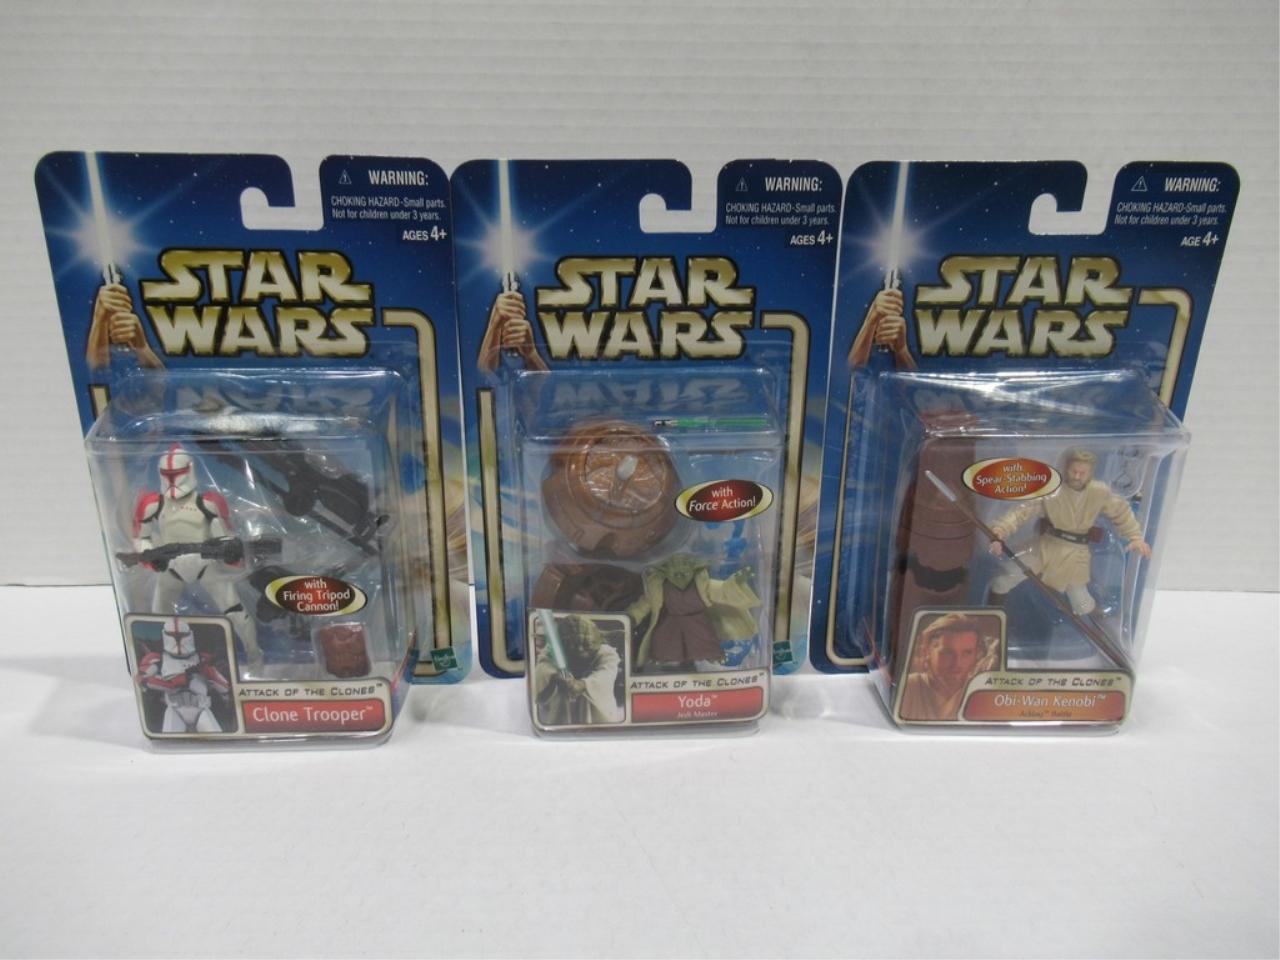 Star Wars Attack of the Clones Figure Lot